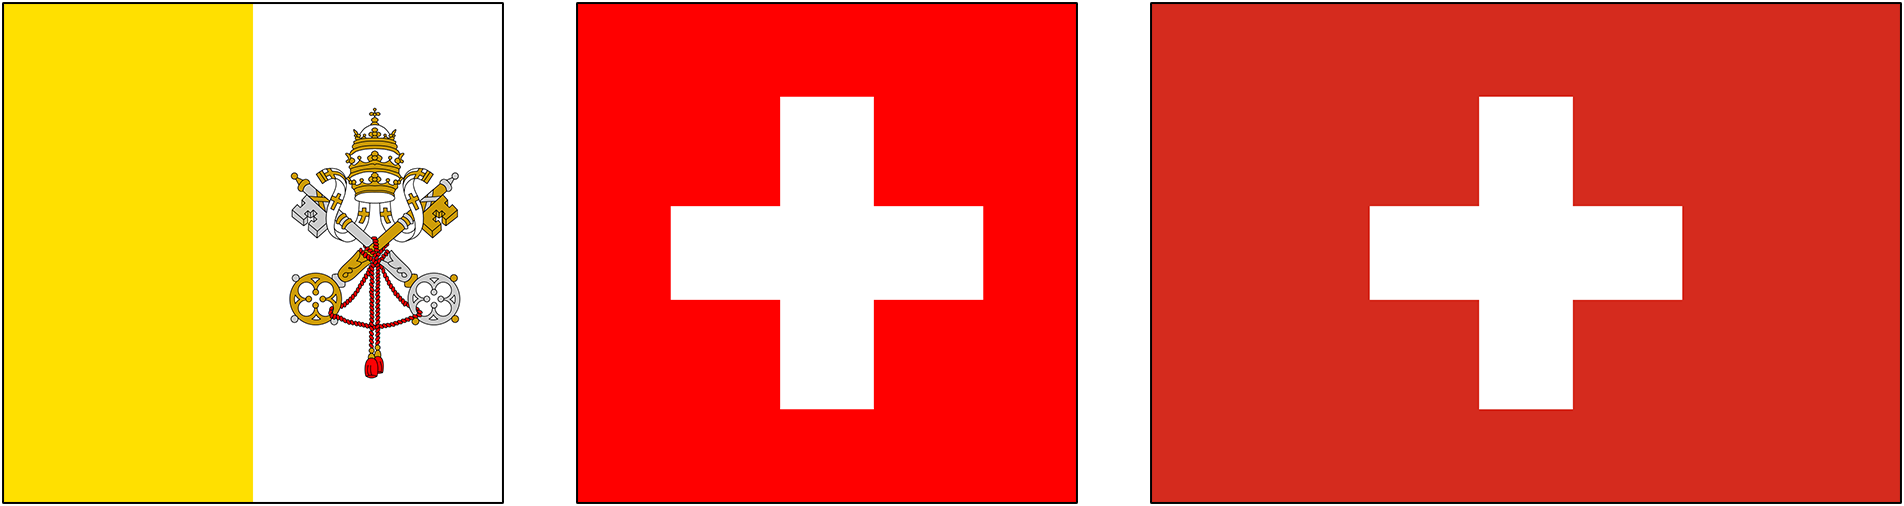 Vatican flag and flags of Switzerland